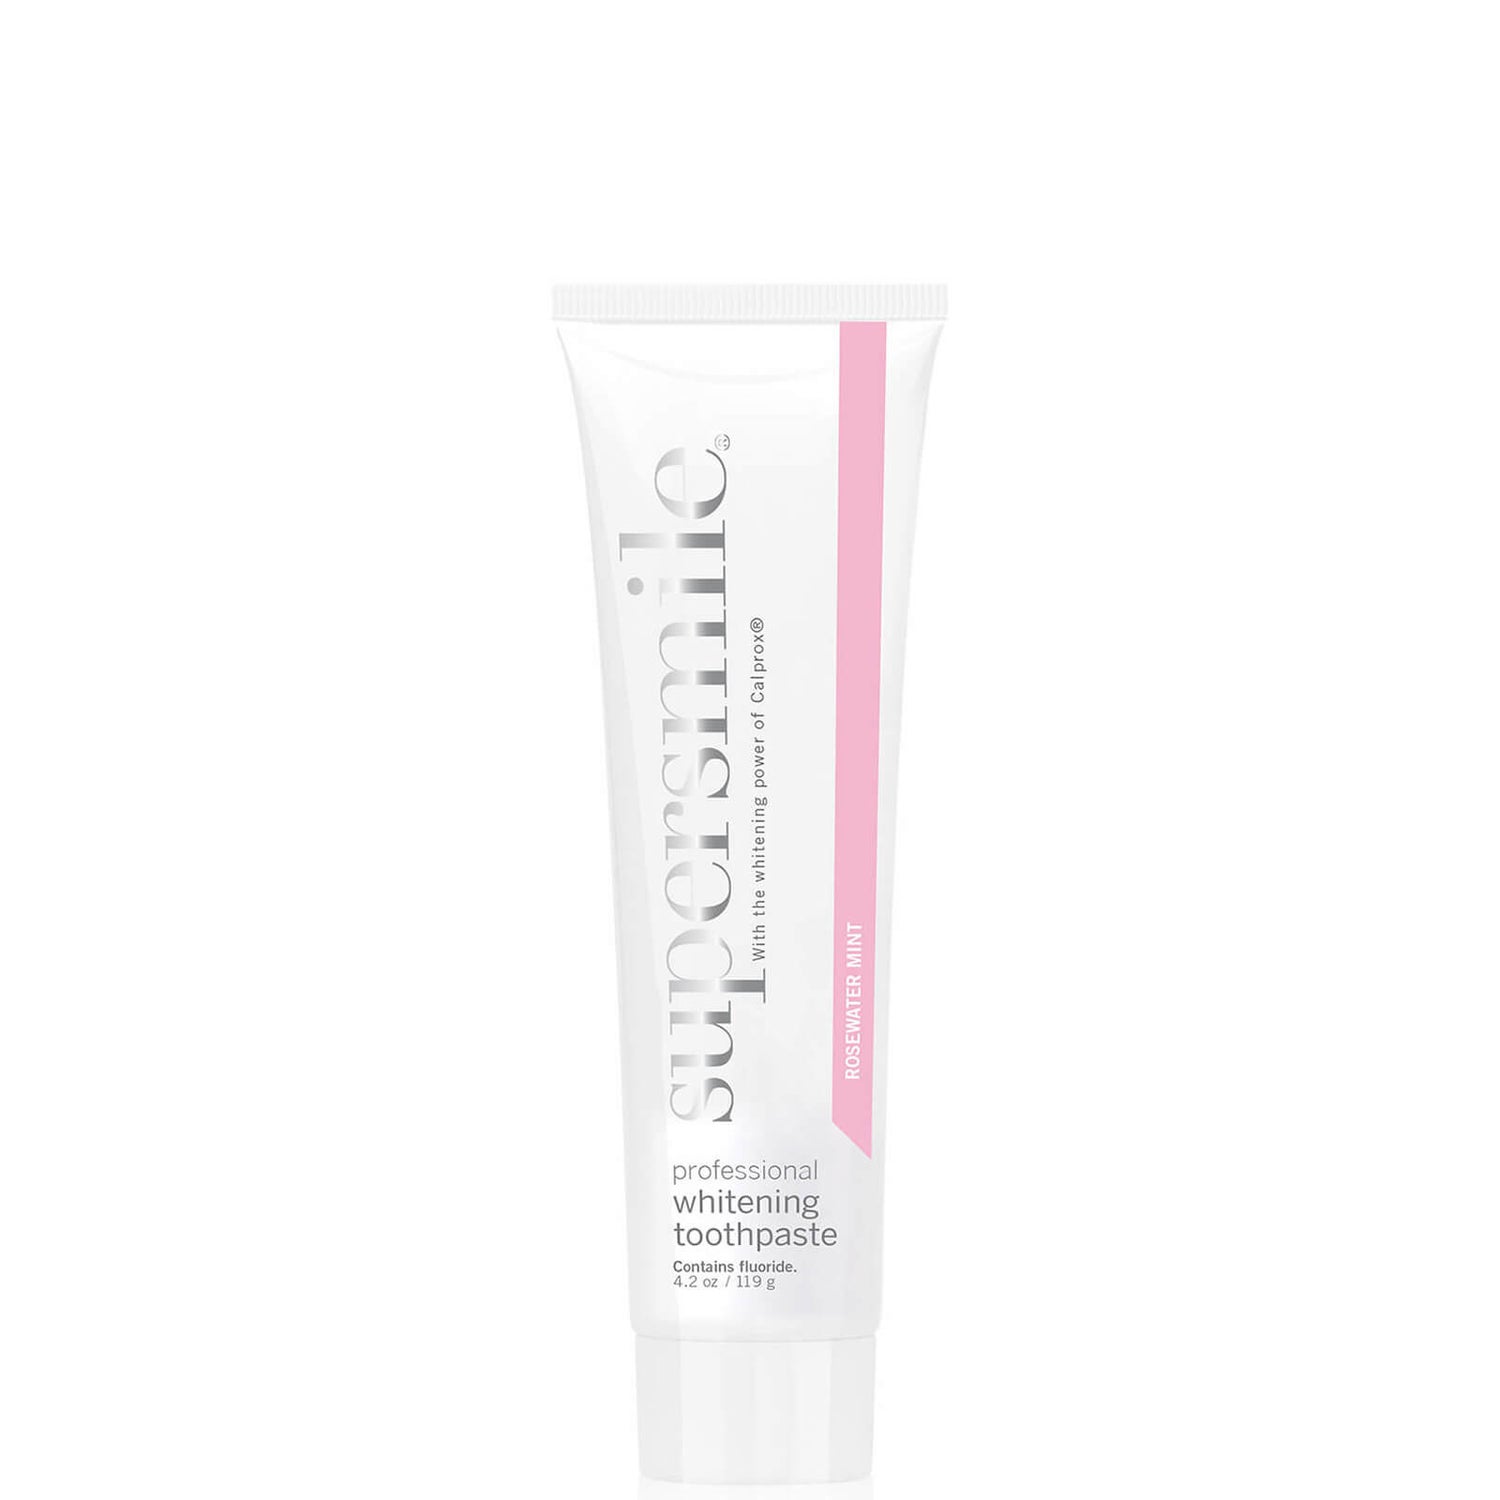 Supersmile Professional Whitening Toothpaste - Rosewater Mint 4.2 oz.